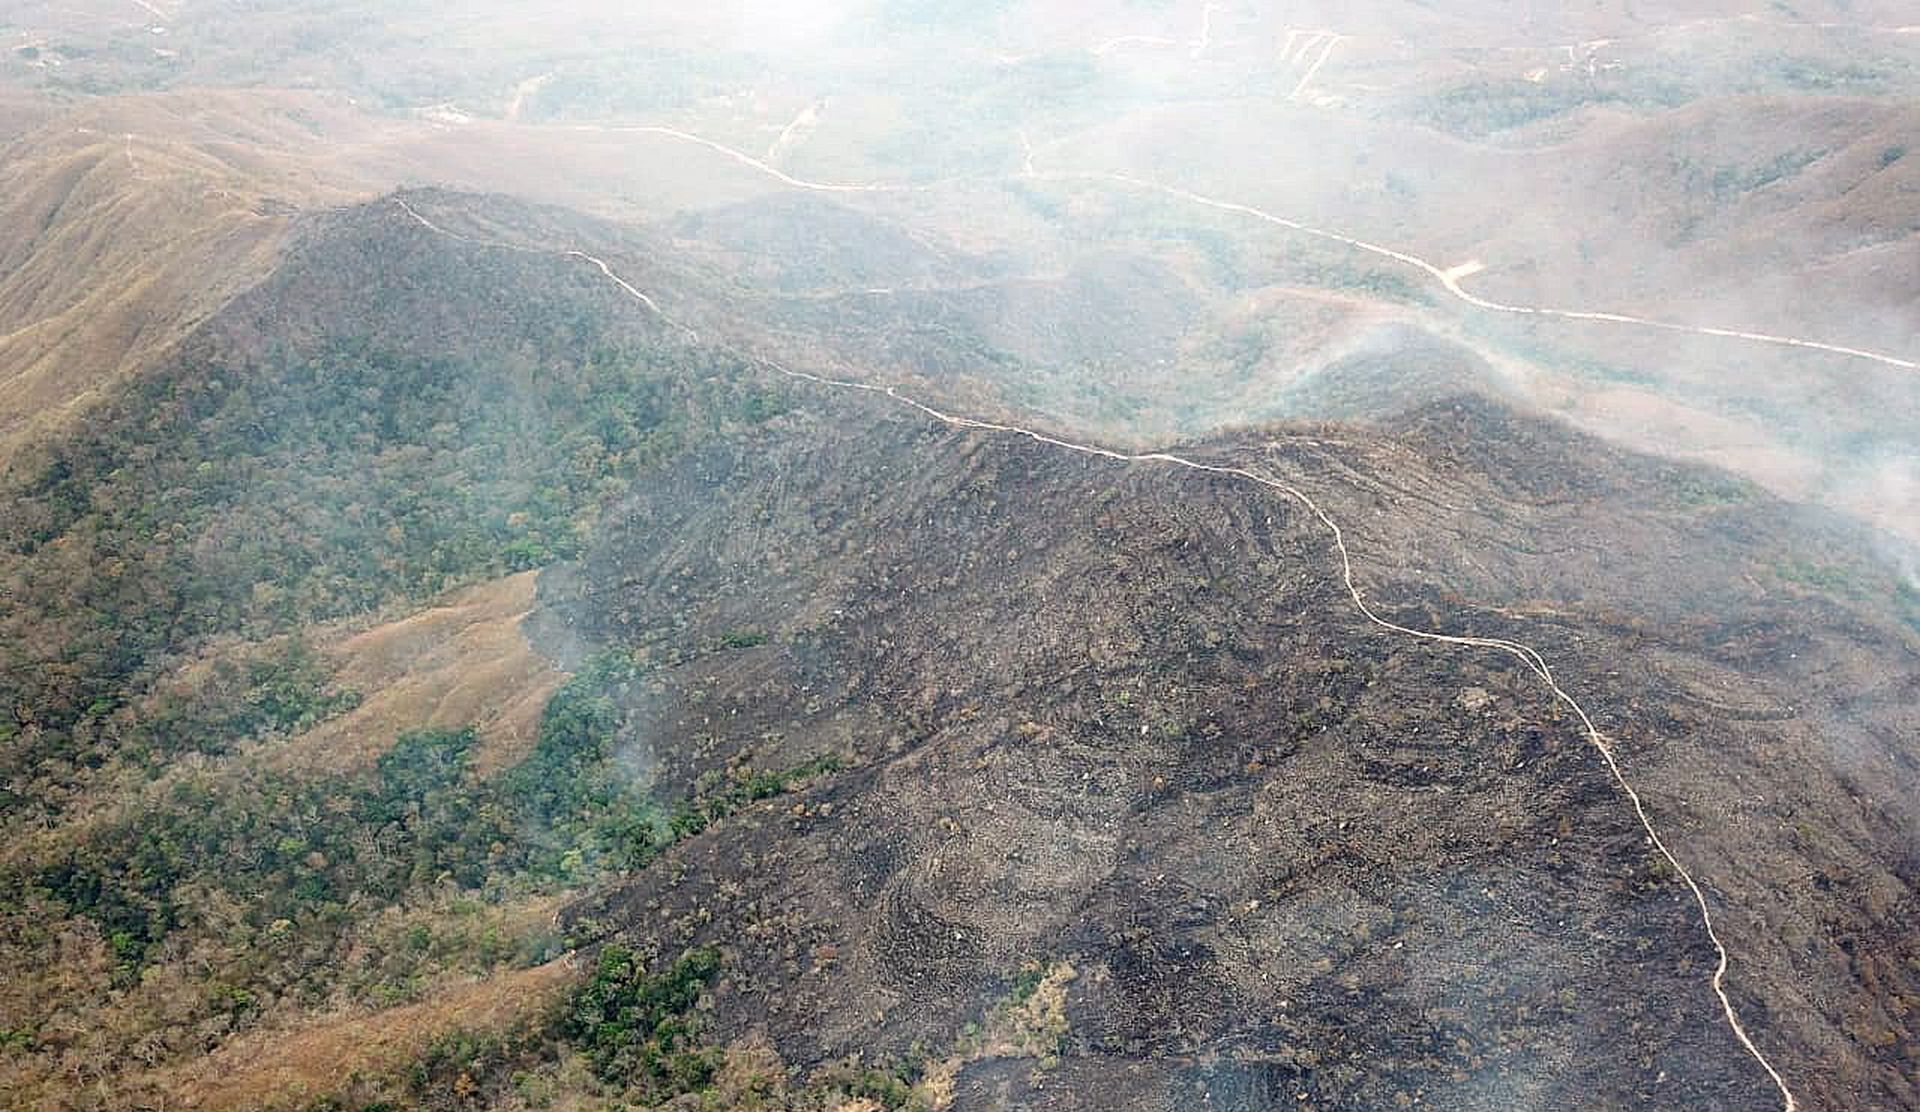 epa07788344 A handoput picture provided by Mato Grosso's Firefighters, shows the Chapada dos Guimaraes fire, in Mato Grosso, Brazil, 23 August 2019. Brazilian President Jair Bolsonaro has decided to confront the world with his rhetoric against what the calls the 'environmentalist hysteria', as the Amazon burns and world leaders demand urgent measures to stop the catastrophe.  EPA/MATO GROSSO FIREFIGHTERS HANDOUT  HANDOUT EDITORIAL USE ONLY/NO SALES